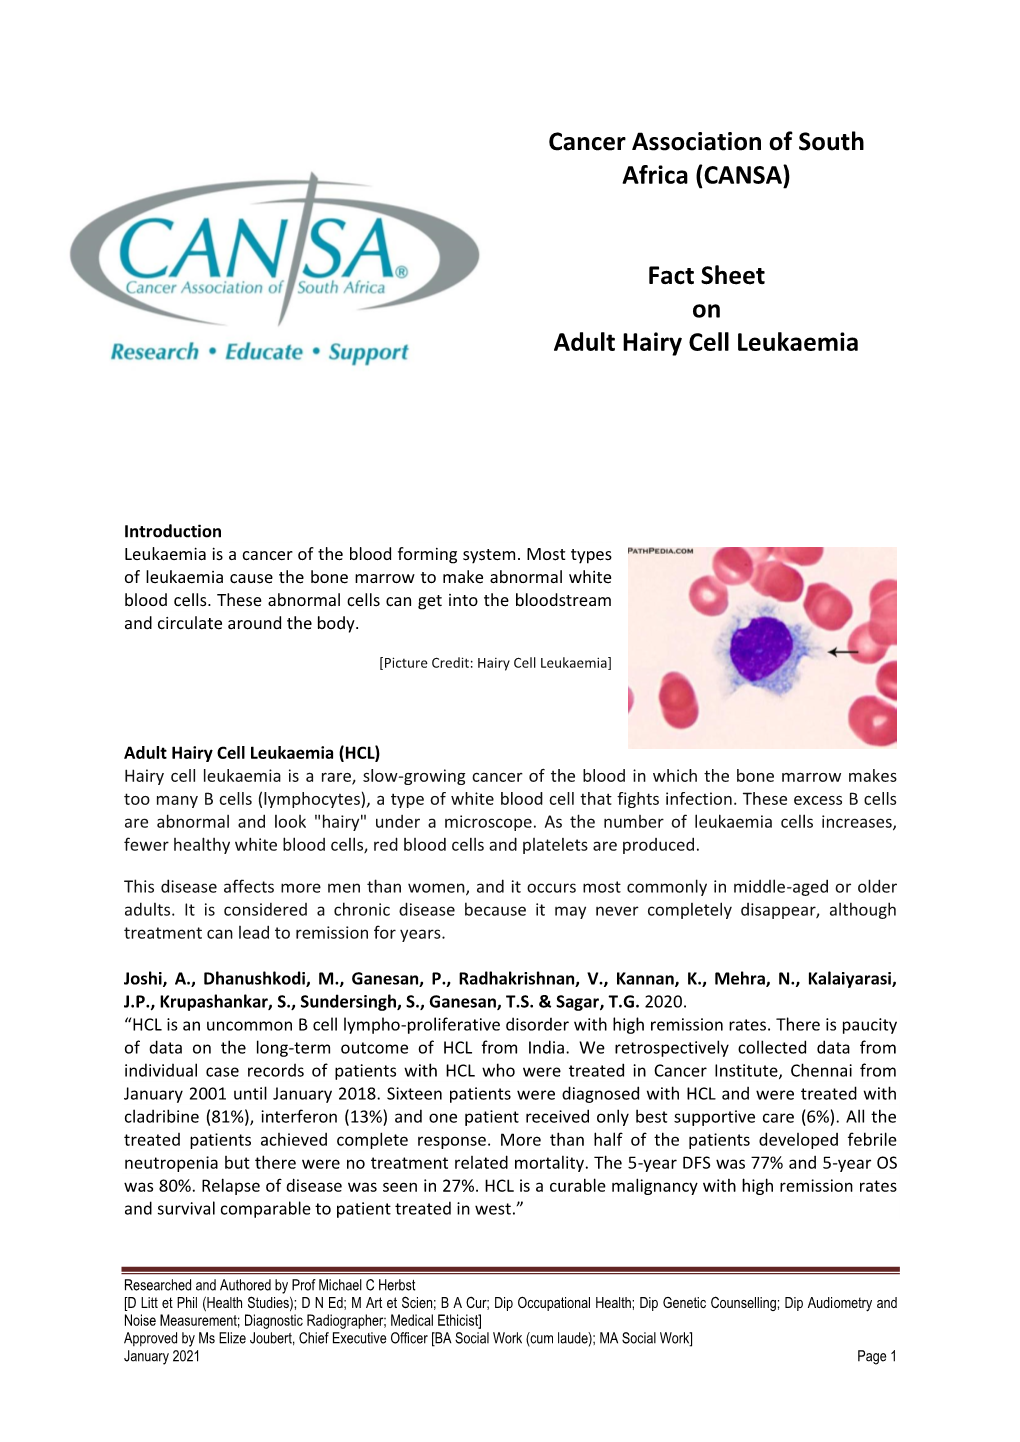 Cancer Association of South Africa (CANSA) Fact Sheet on Adult Hairy Cell Leukaemia